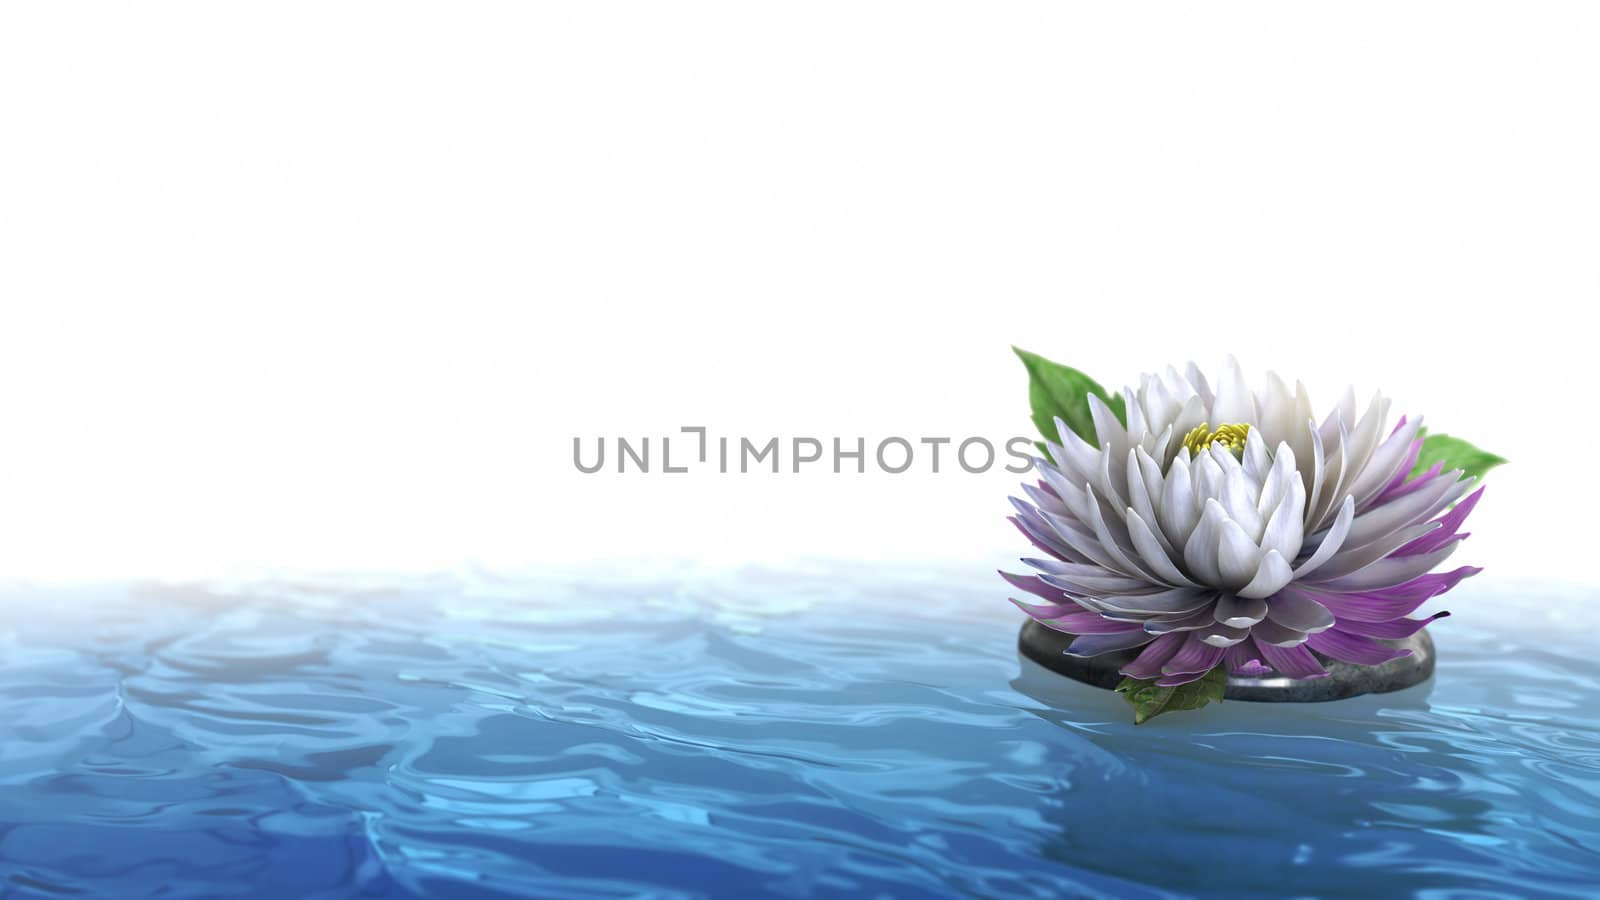 decorative holiday background flower with stone on the water